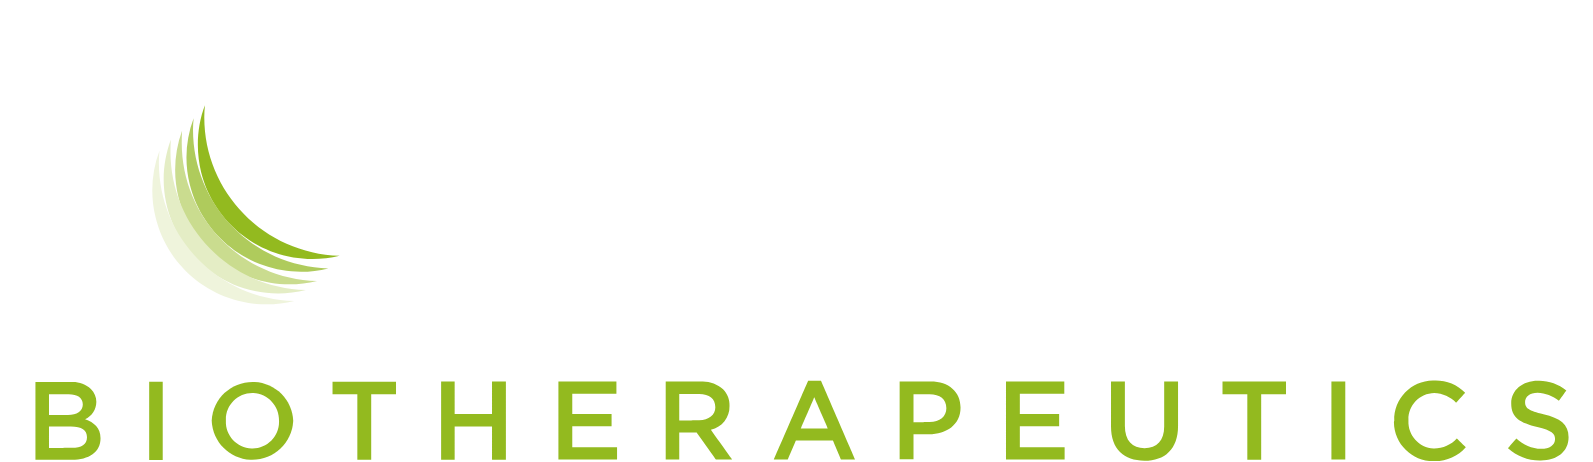 Iovance Biotherapeutics
 logo large for dark backgrounds (transparent PNG)